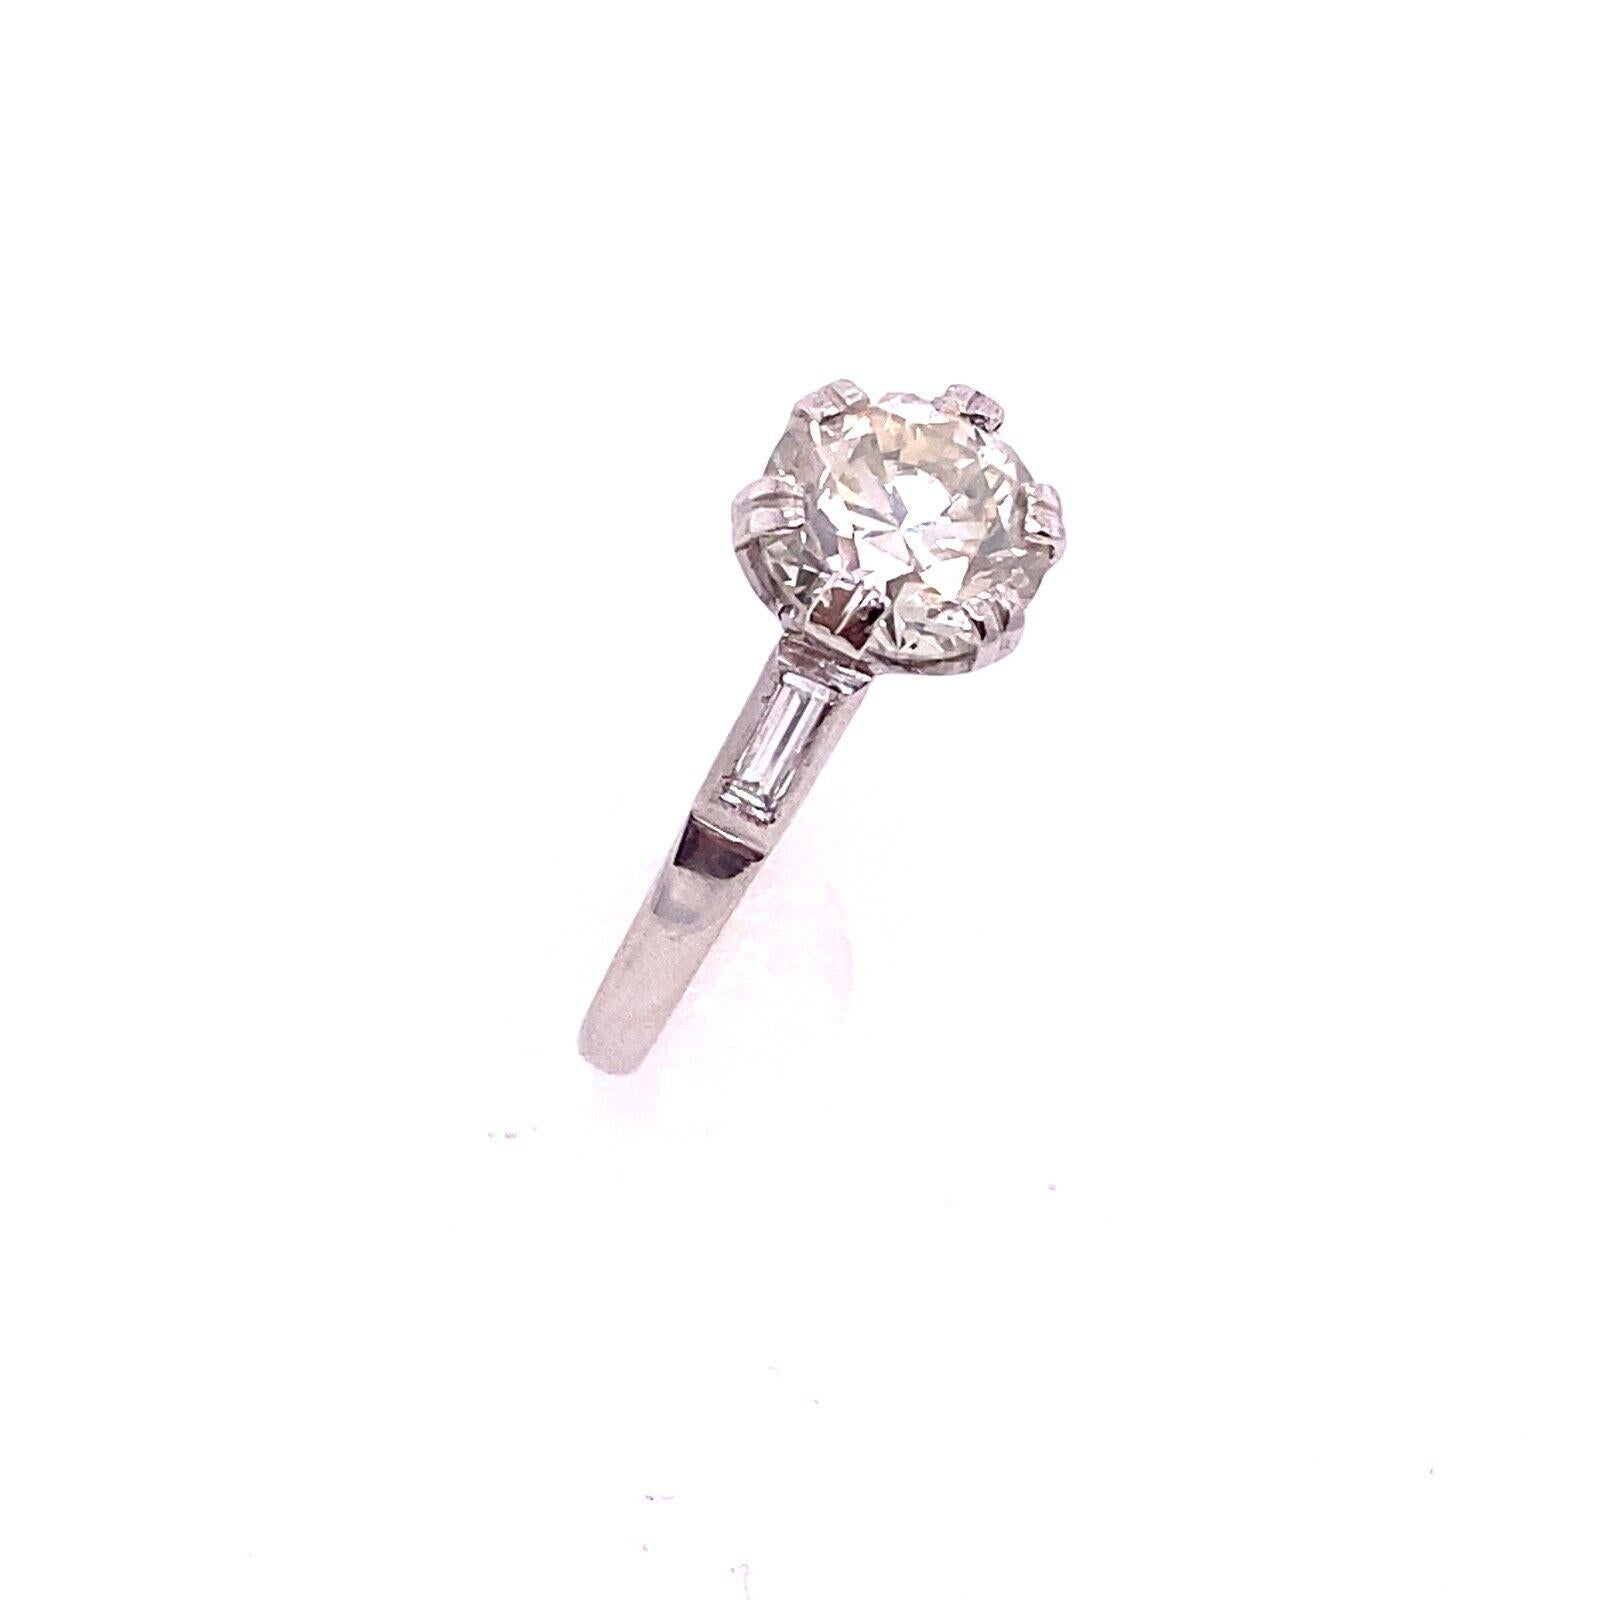 This Diamond is absolutely gorgeous. It is a 2.03ct round brilliant cut Diamond with an L1 clarity and an I1 colour. The Diamond is set in a beautiful 18ct White Gold setting with one baguettes on each shoulder. This Diamond is absolutely perfect